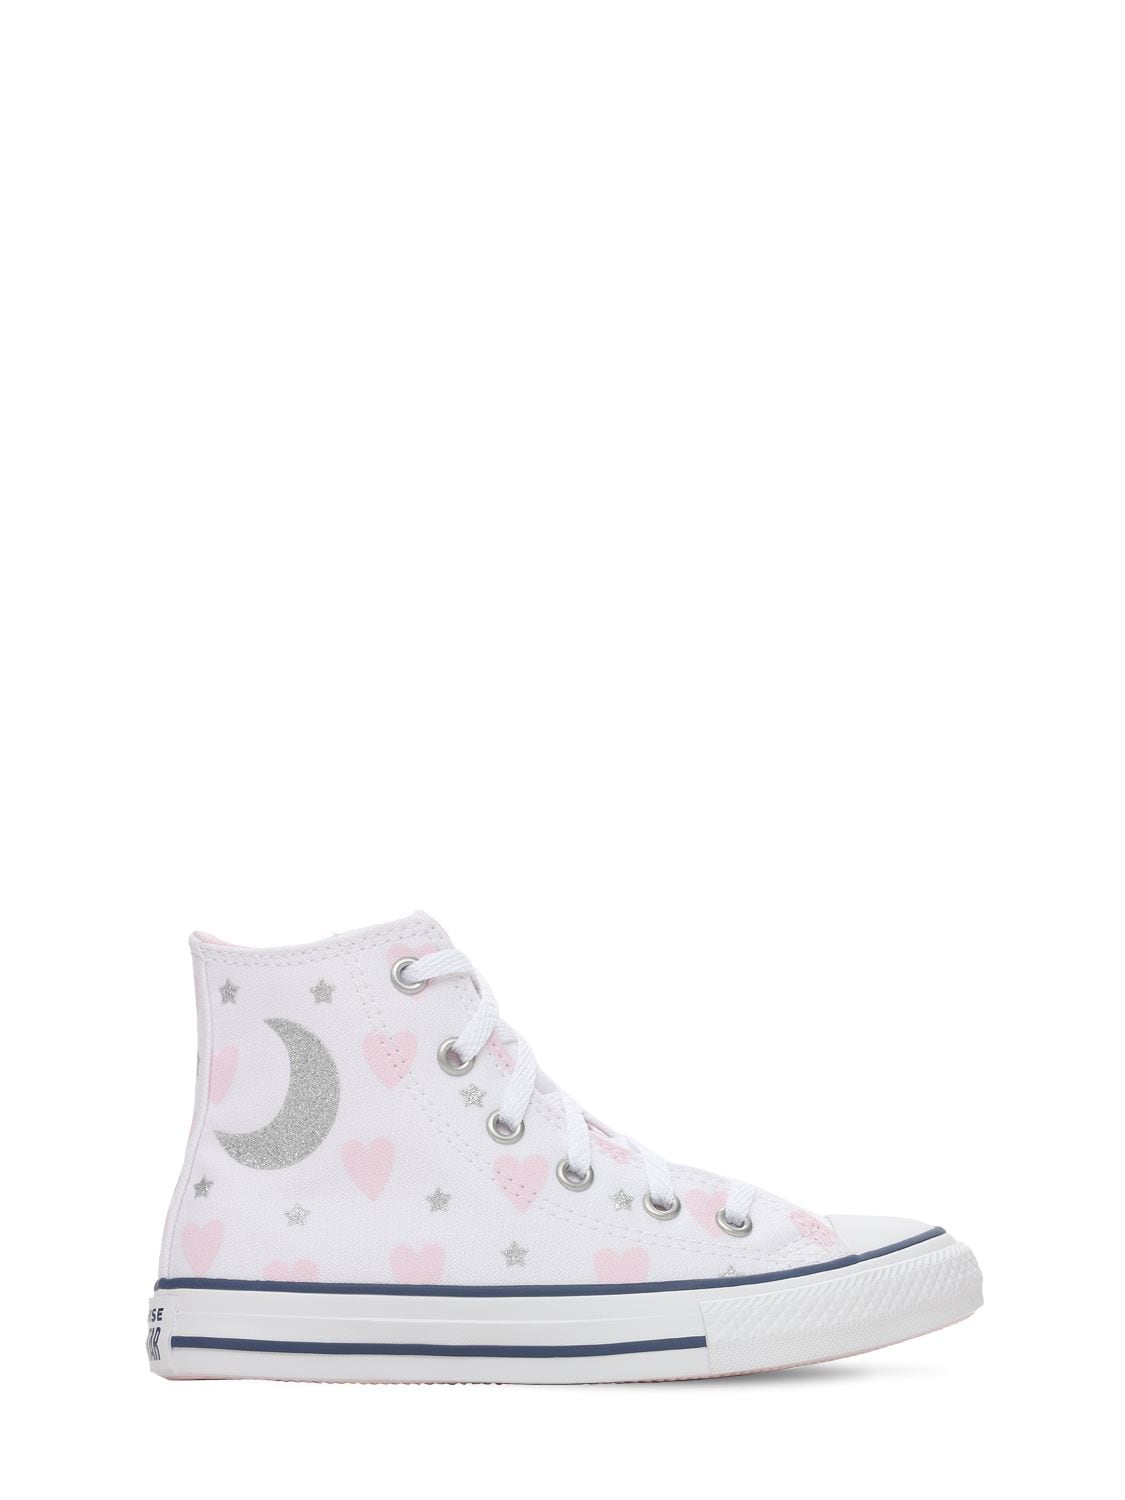 Converse Kids' Chuck Taylor High Sneakers In White